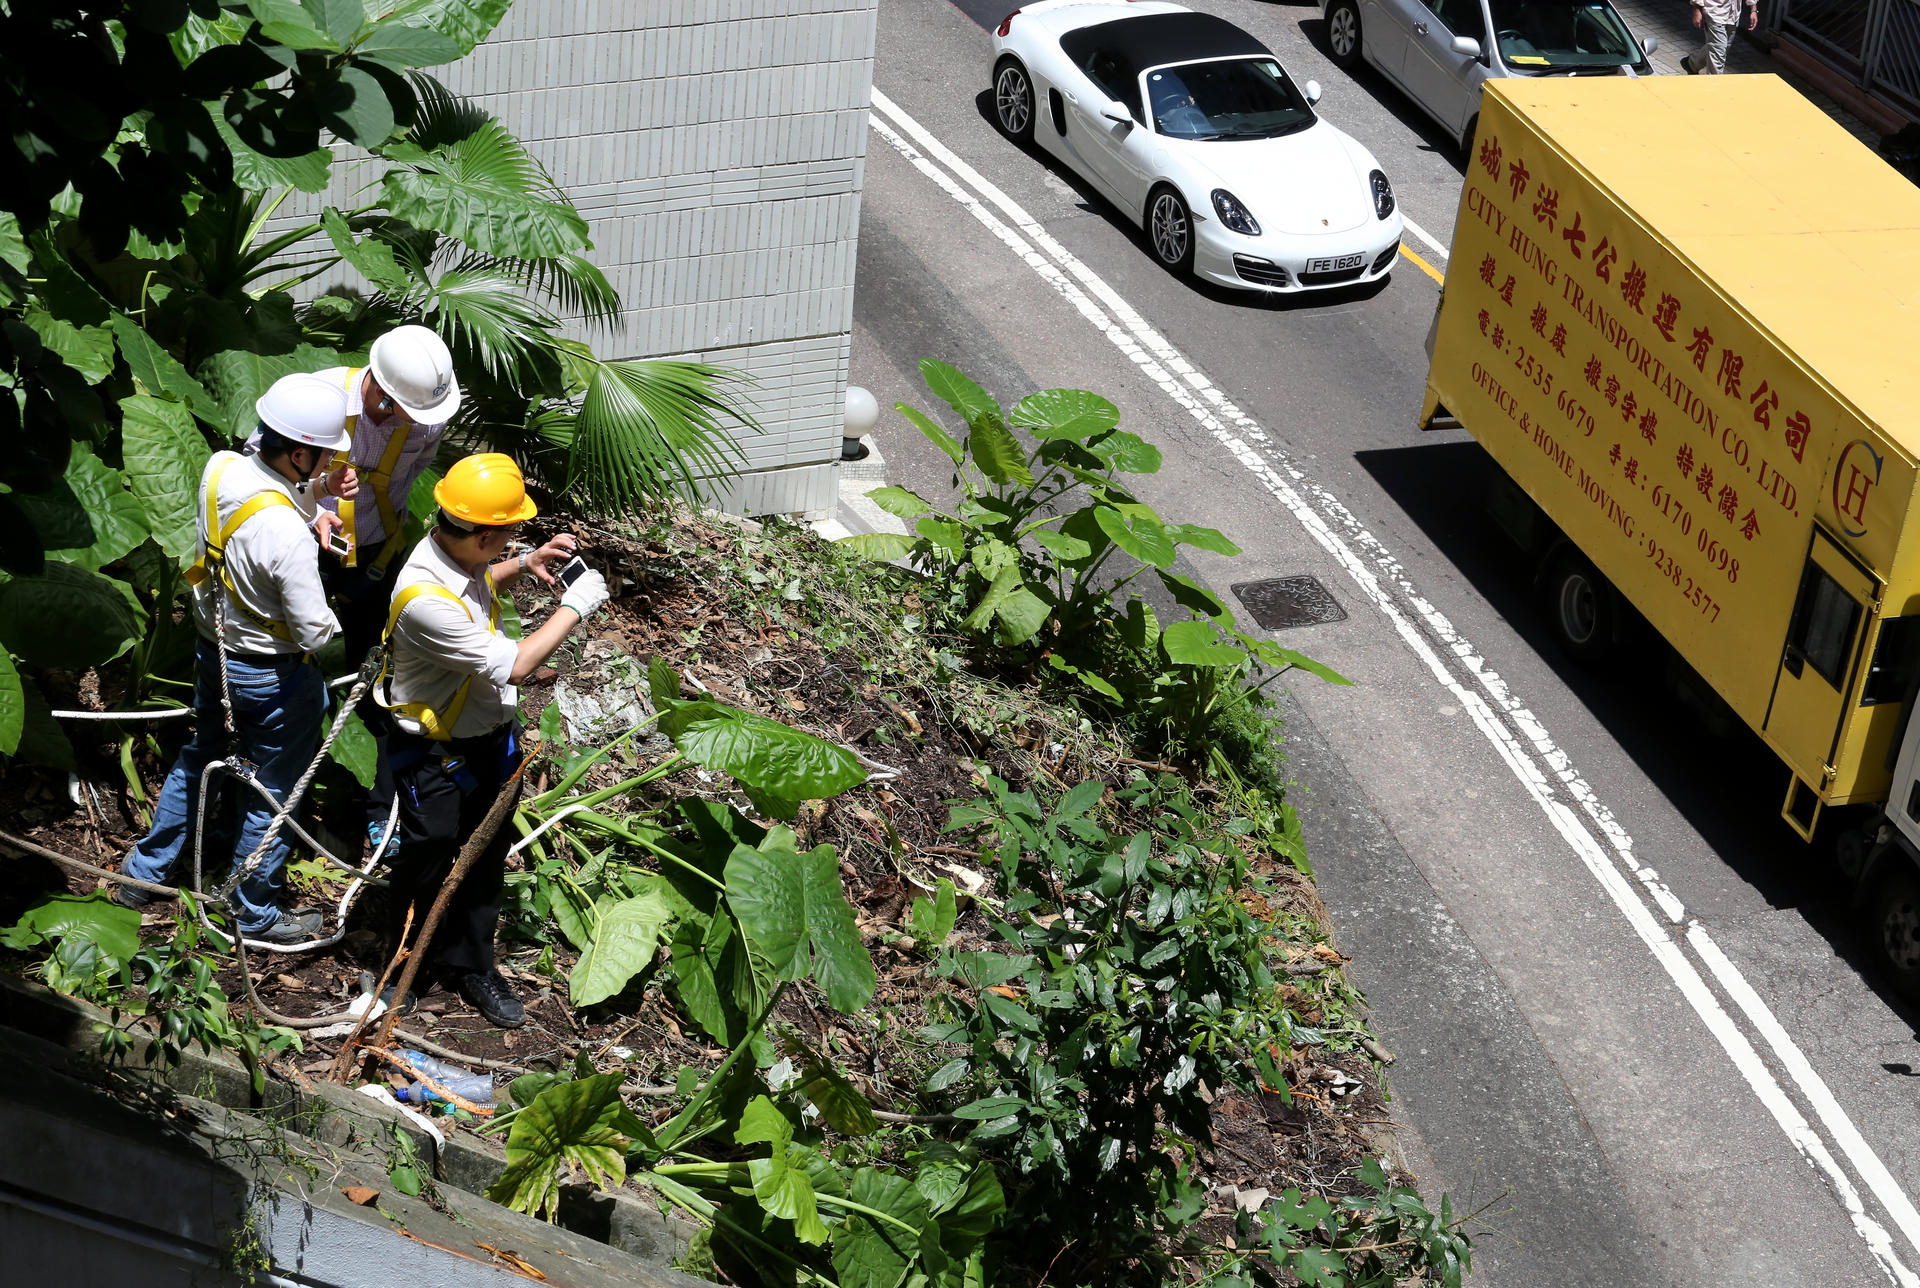 Workers examine the site of the fatal accident. Photo: Felix Wong